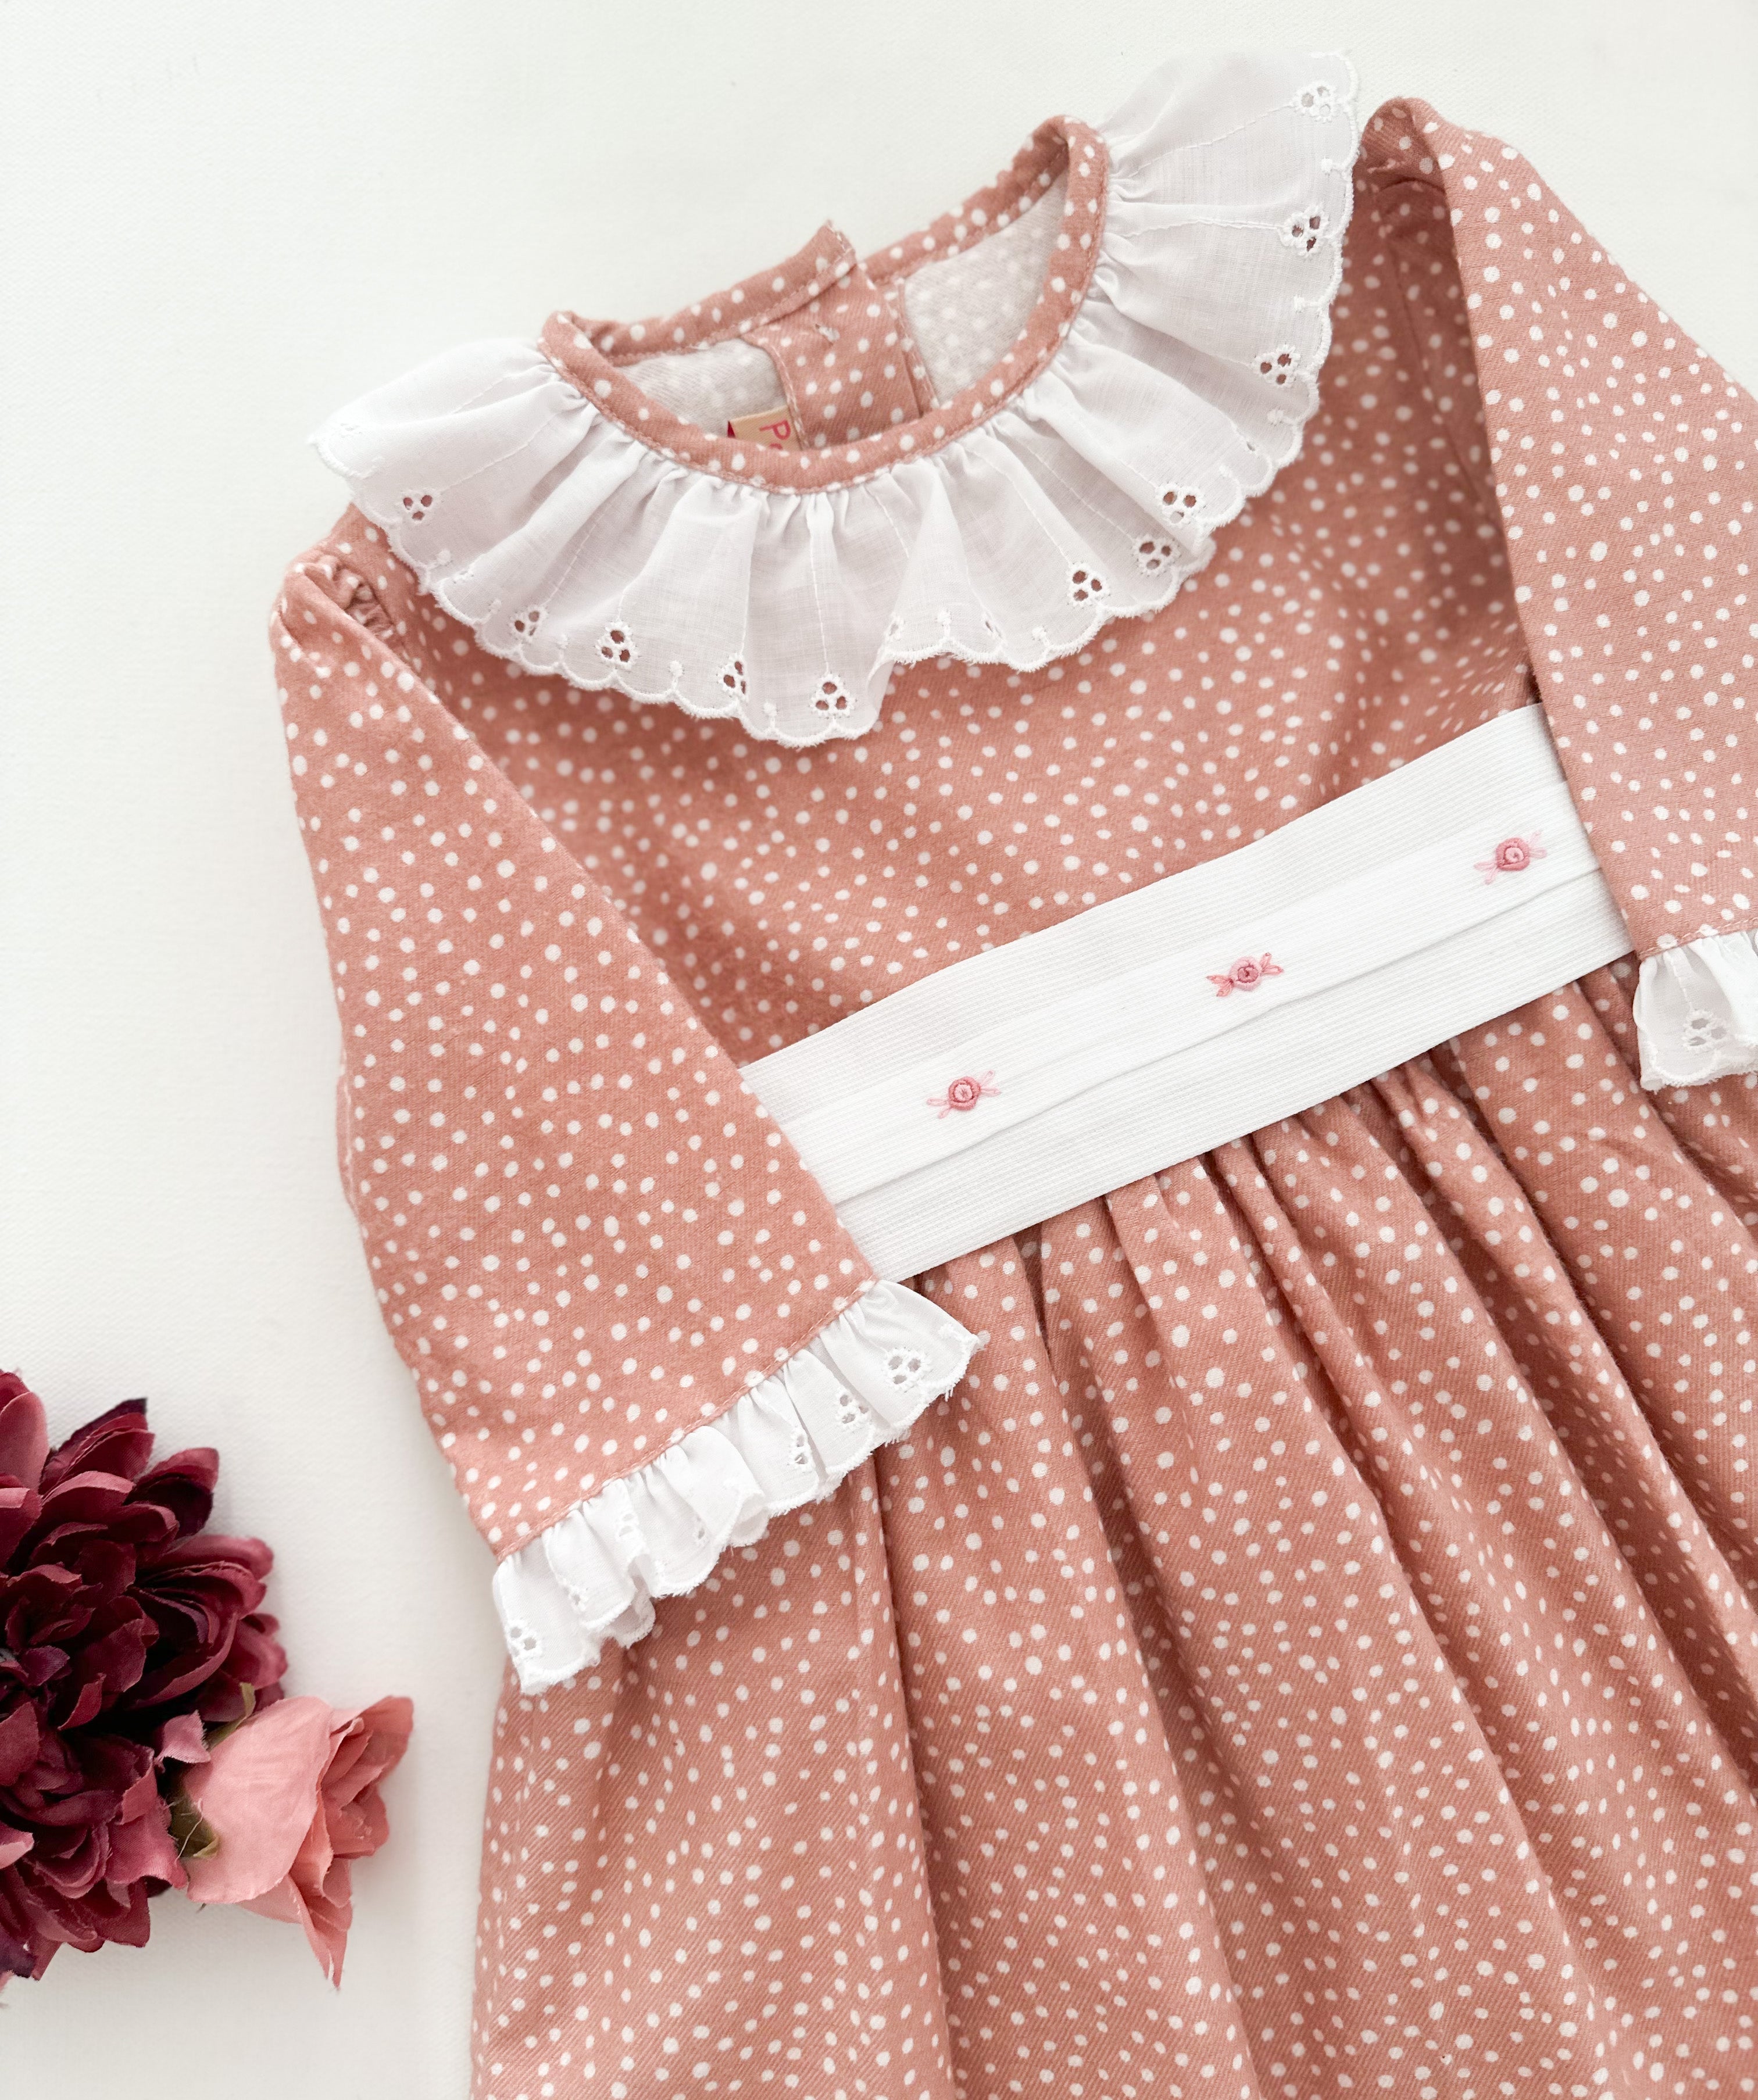 ** SECONDS SALE ** The classic BEATRICE dress - Pink